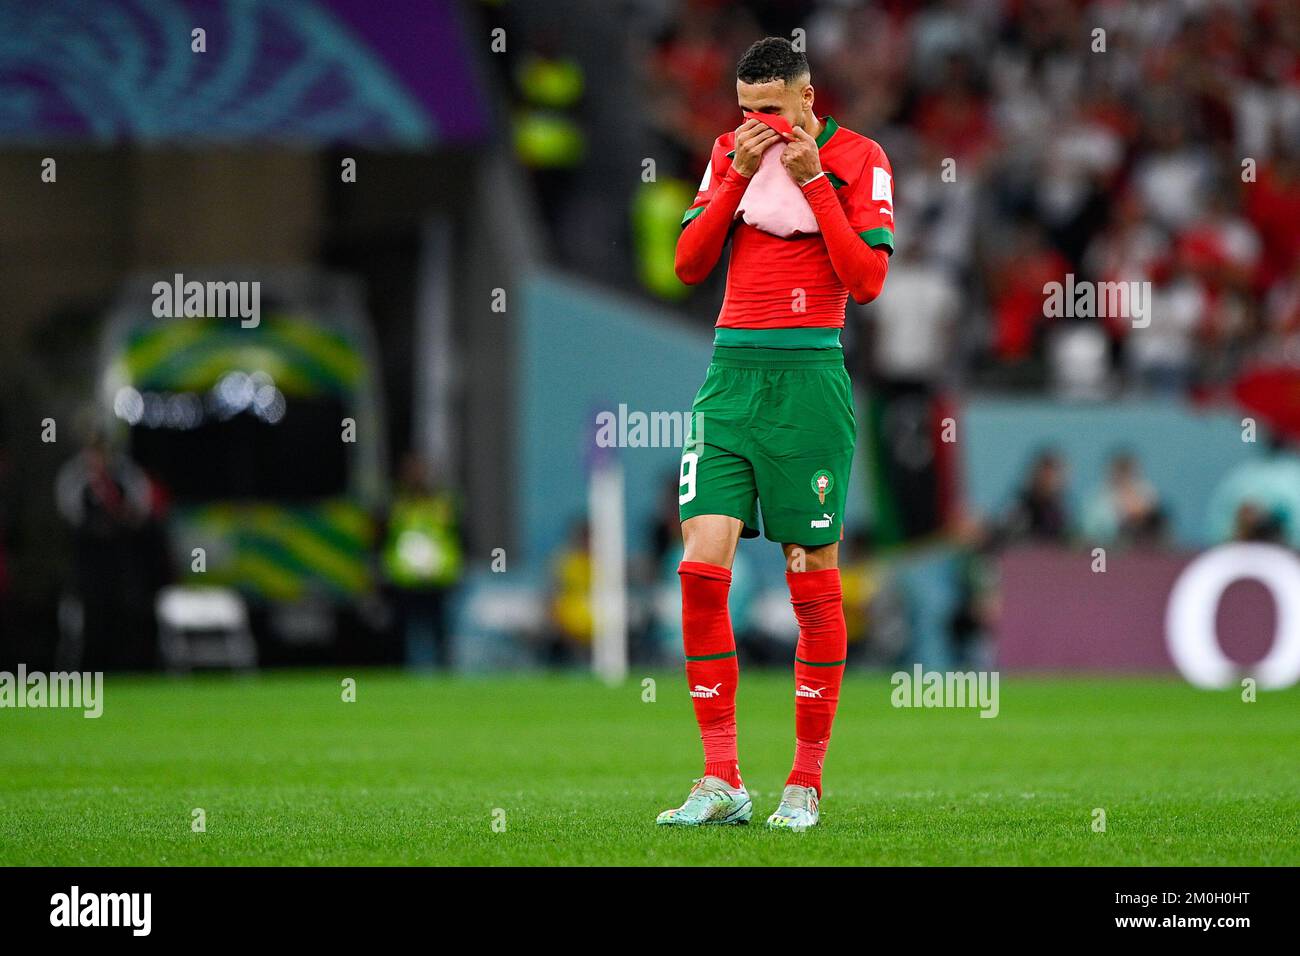 AL RAYYAN, QATAR - DECEMBER 6: Youssef En Nesyri of Morocco reacts during the Round of 16 - FIFA World Cup Qatar 2022 match between Morocco and Spain at the Education City Stadium on December 6, 2022 in Al Rayyan, Qatar (Photo by Pablo Morano/BSR Agency) Stock Photo